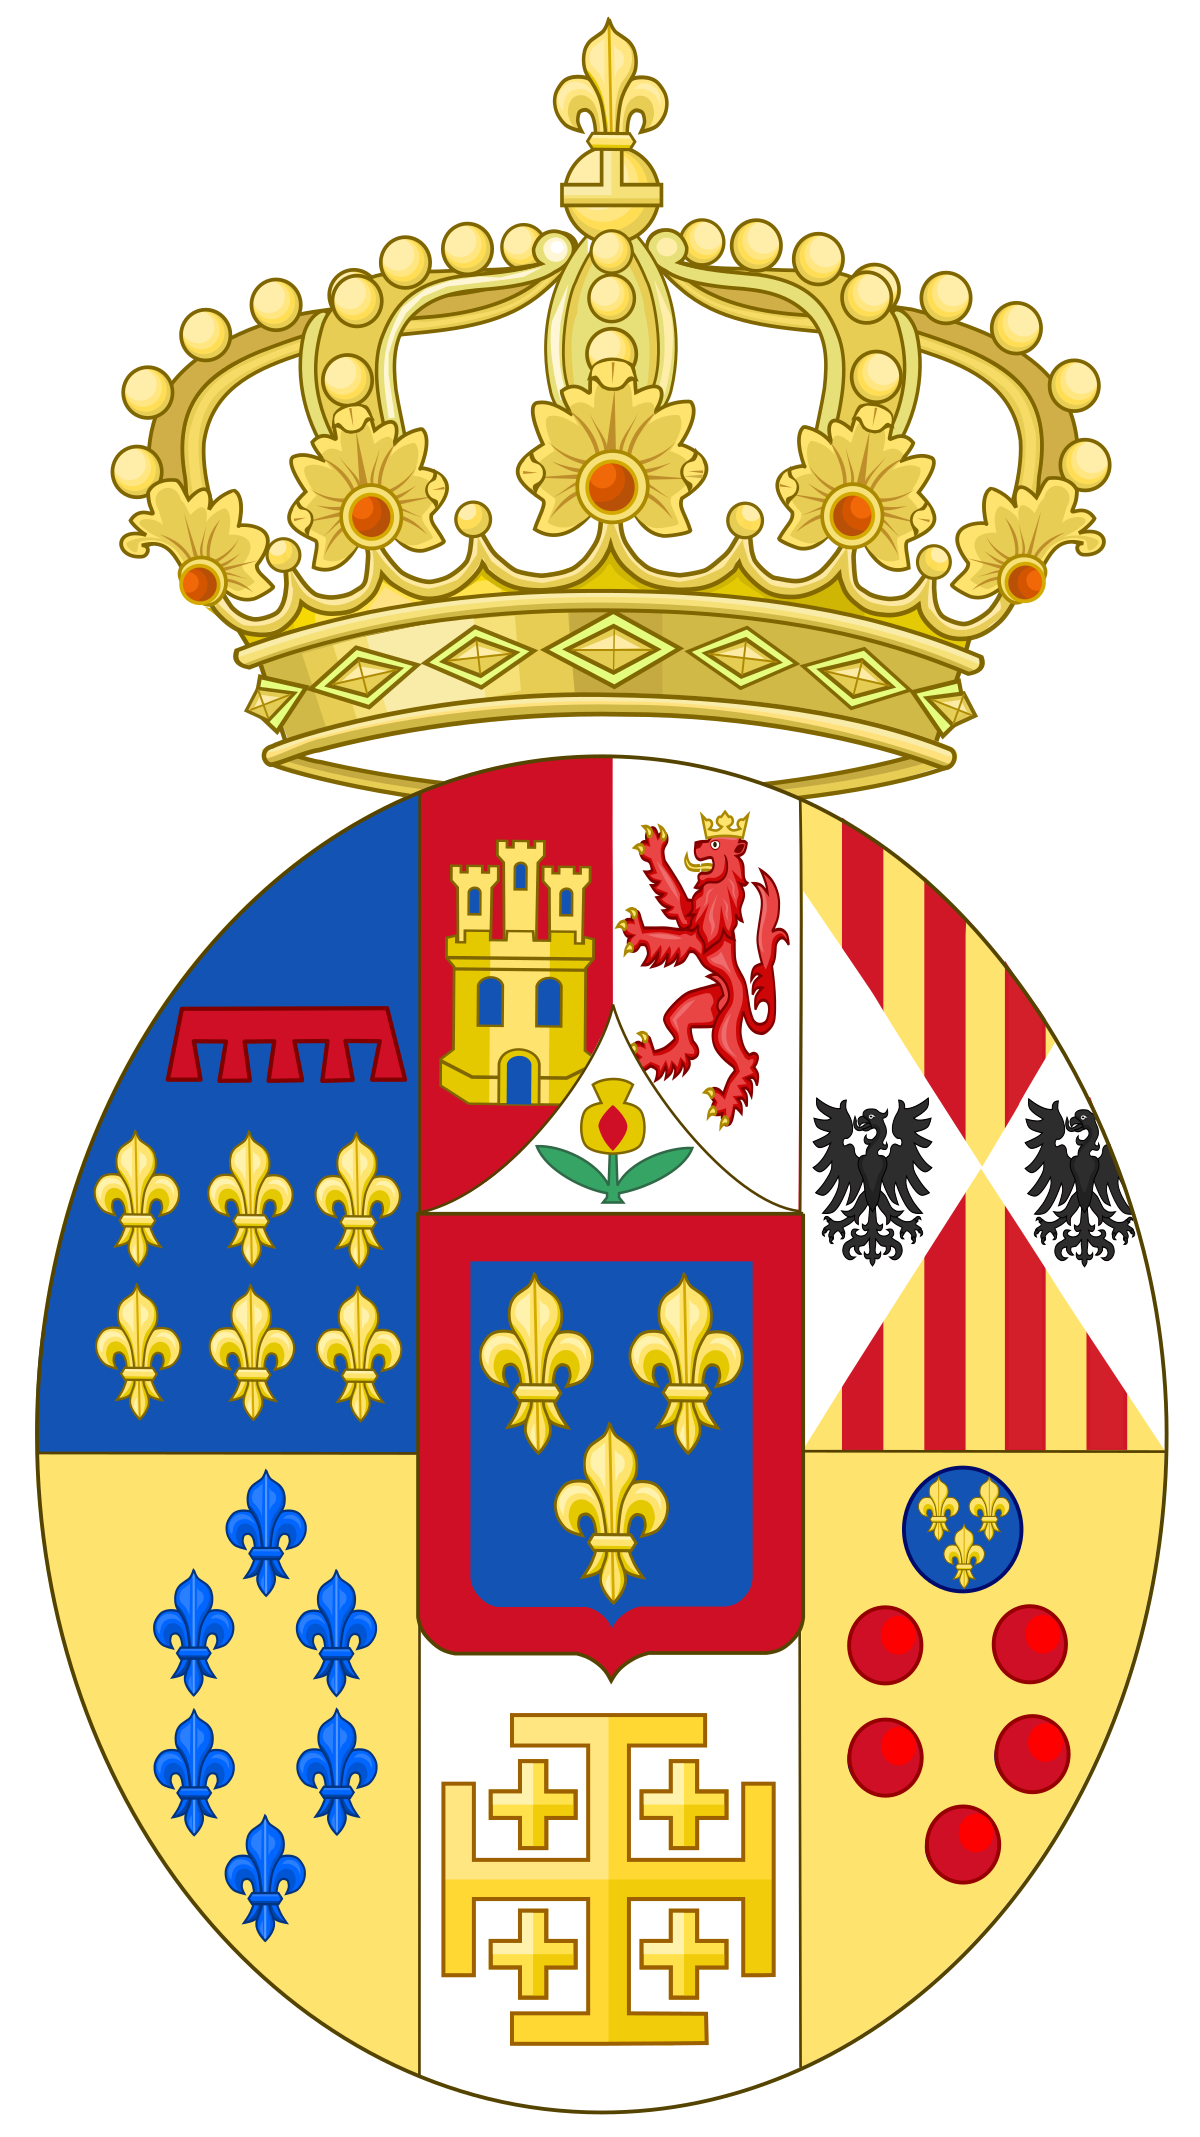 Download File:Coat of Arms of Princes of the Two Sicilies (c.1840 ...